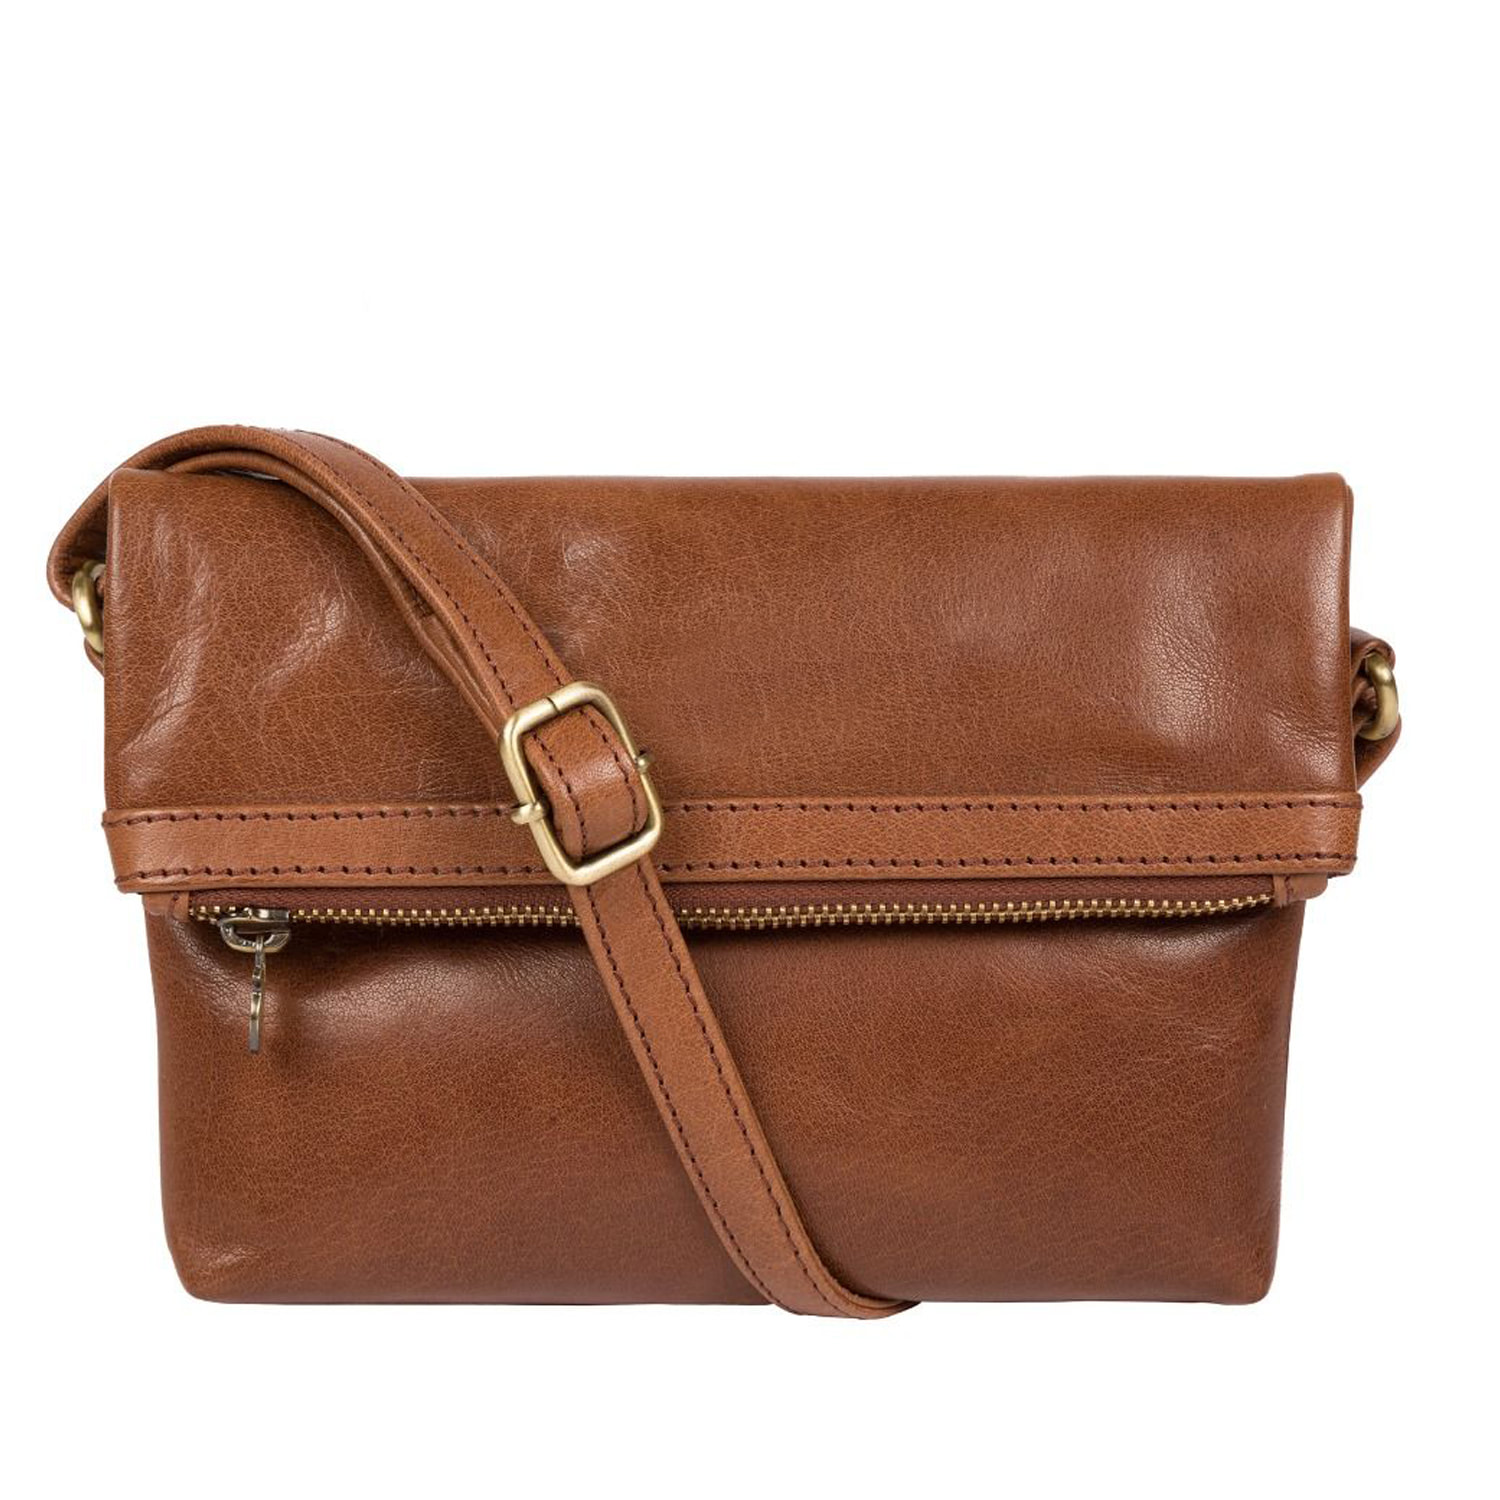 70% Off Small Tan Leather Cross Body Shoulder Bag